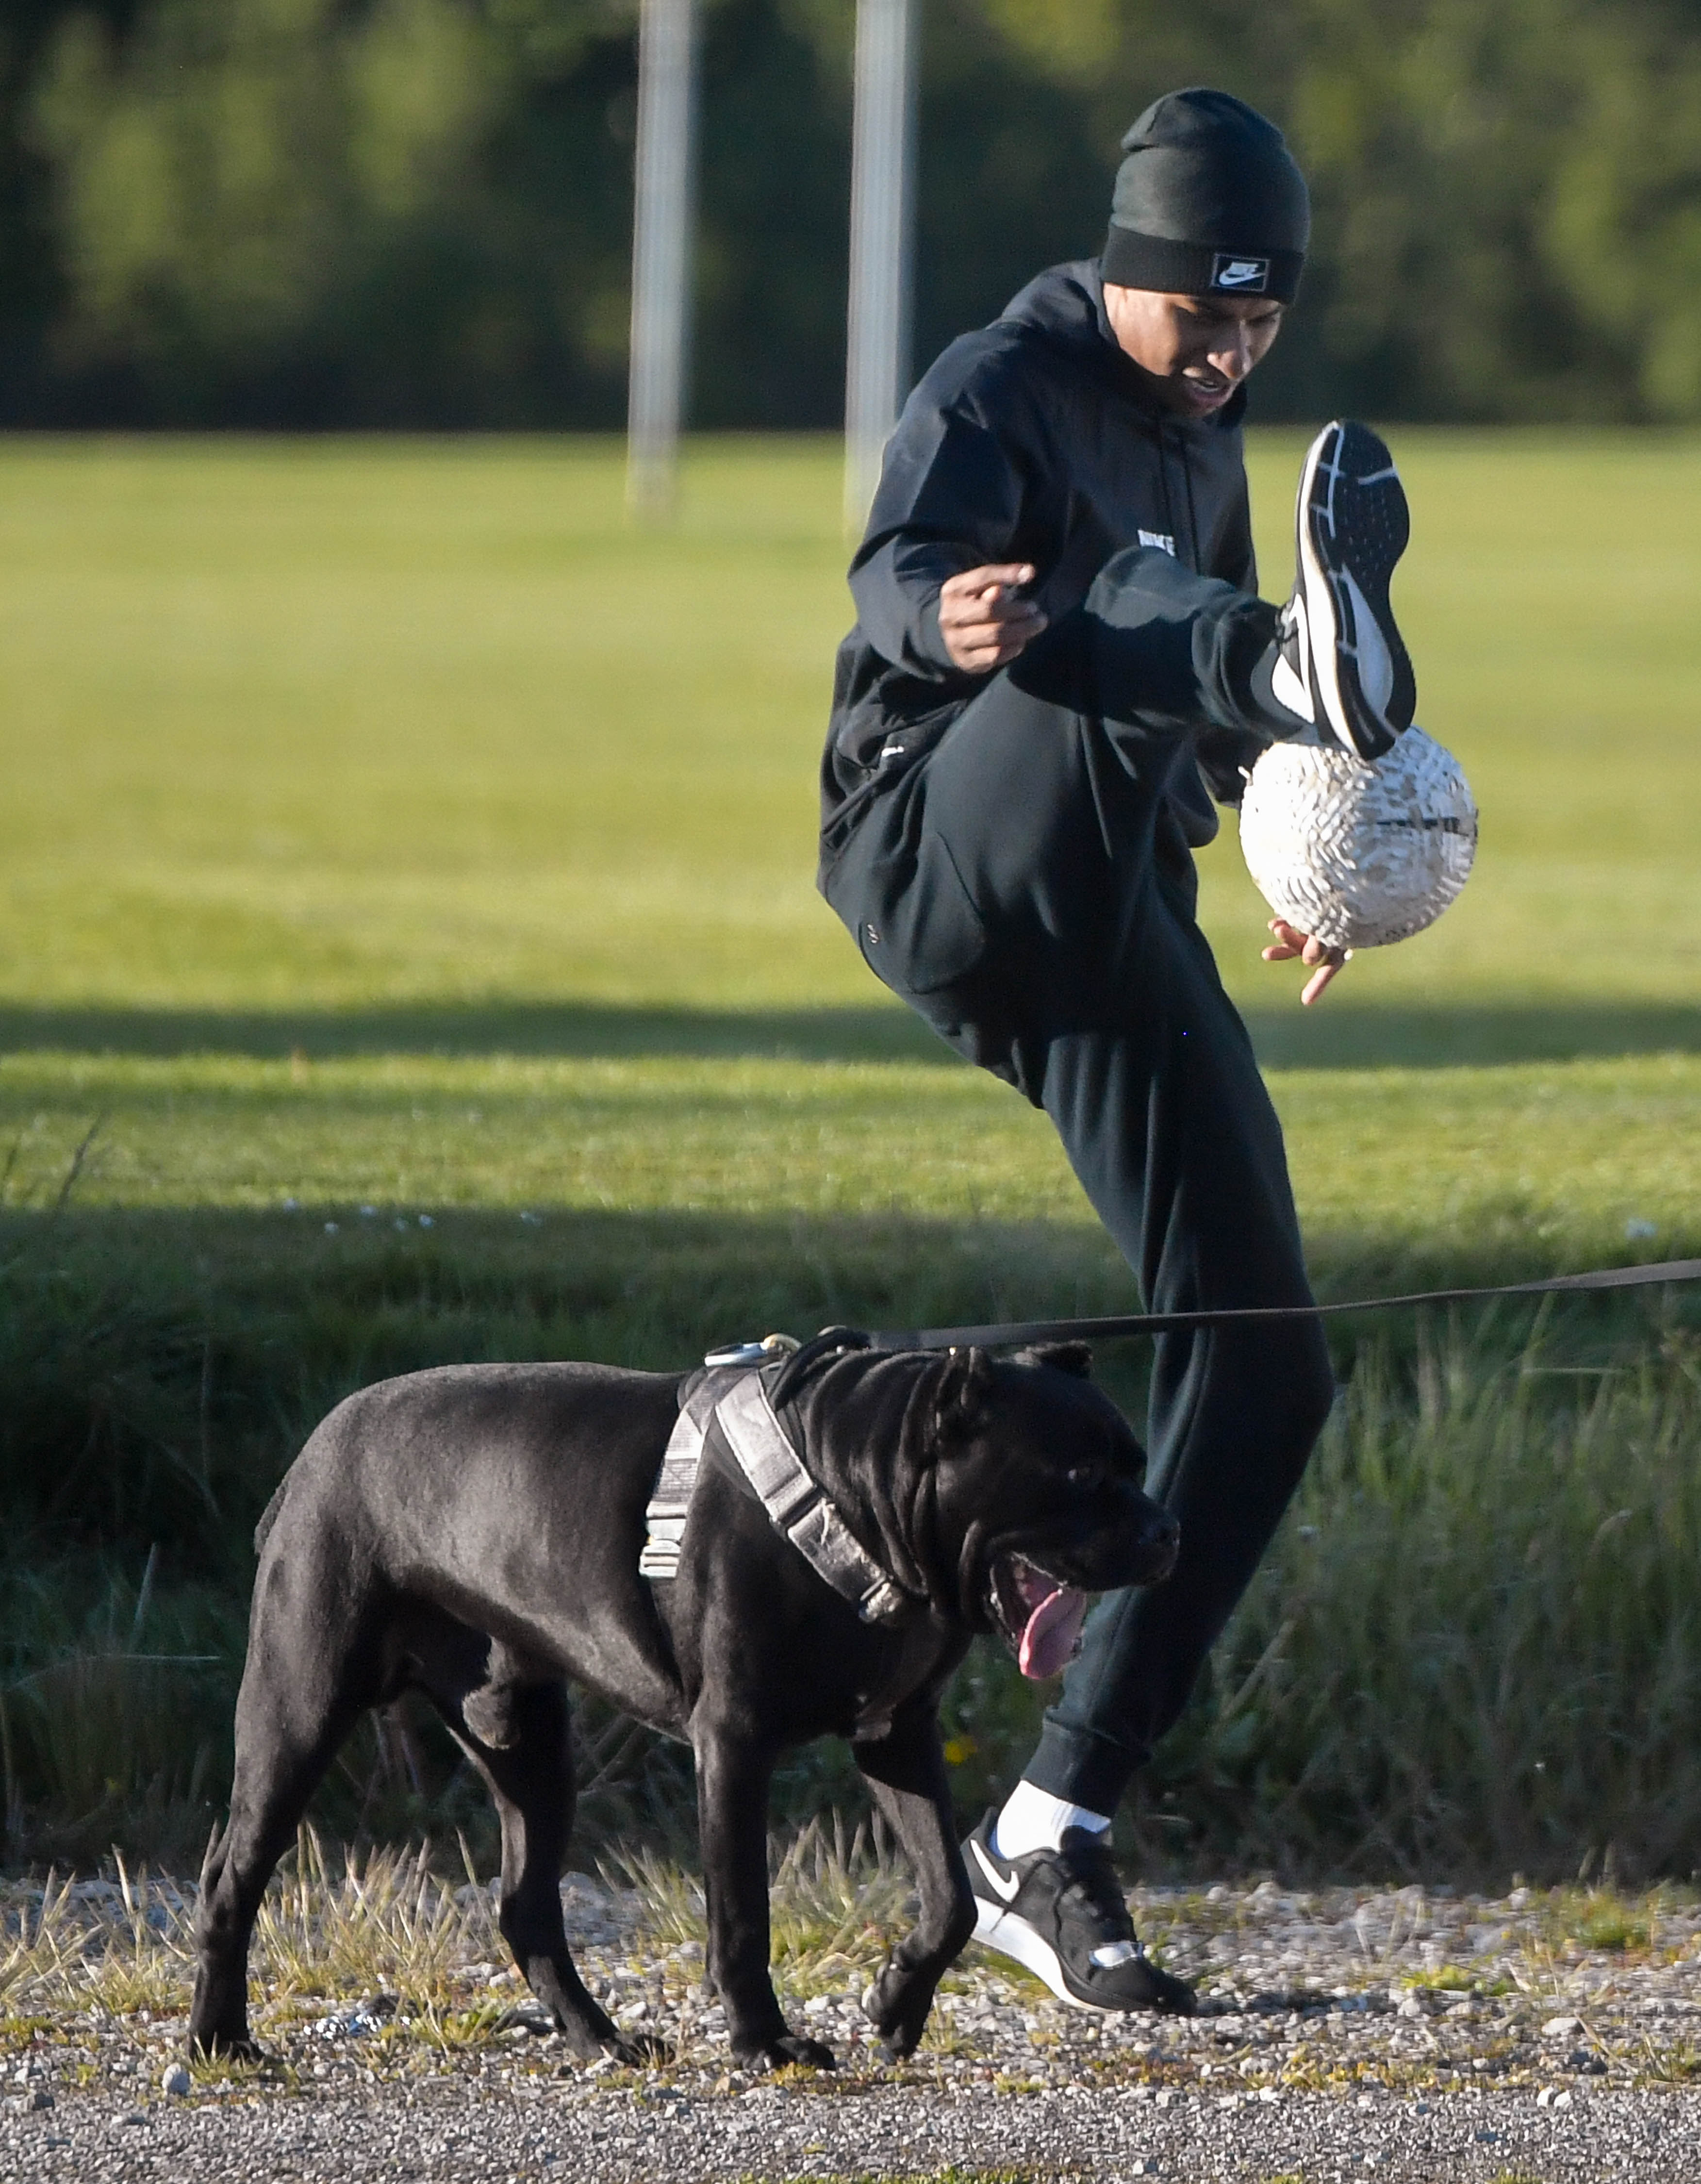 Footie star Marcus Rashford was spotted with his dogs for a walk in a Cheshire park